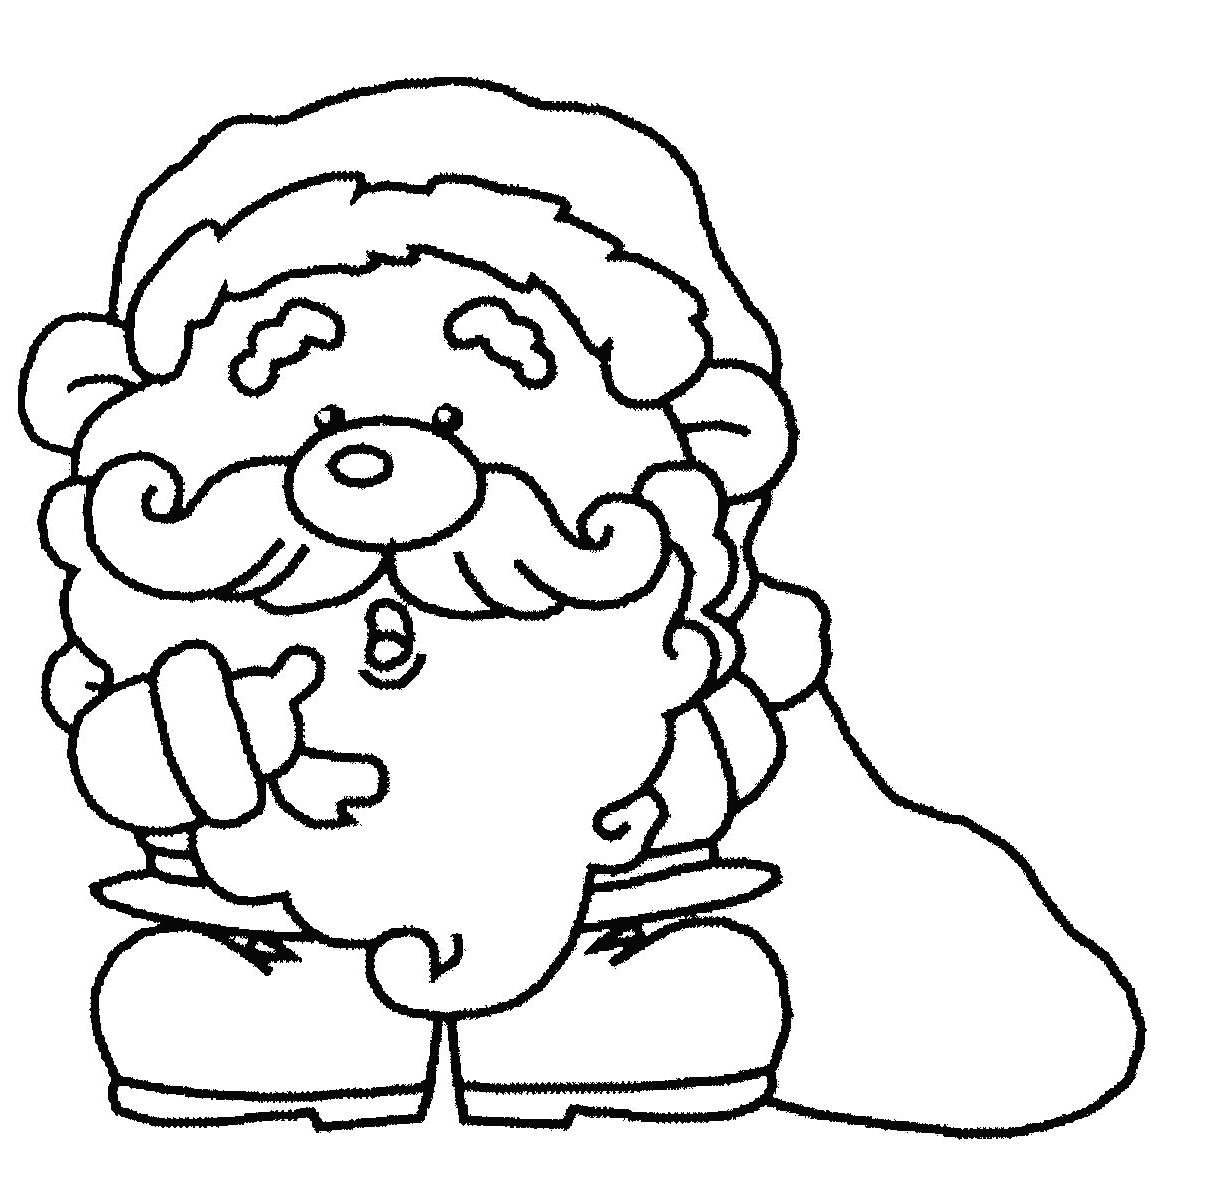 Coloring page: Santa Claus (Characters) #104816 - Free Printable Coloring Pages